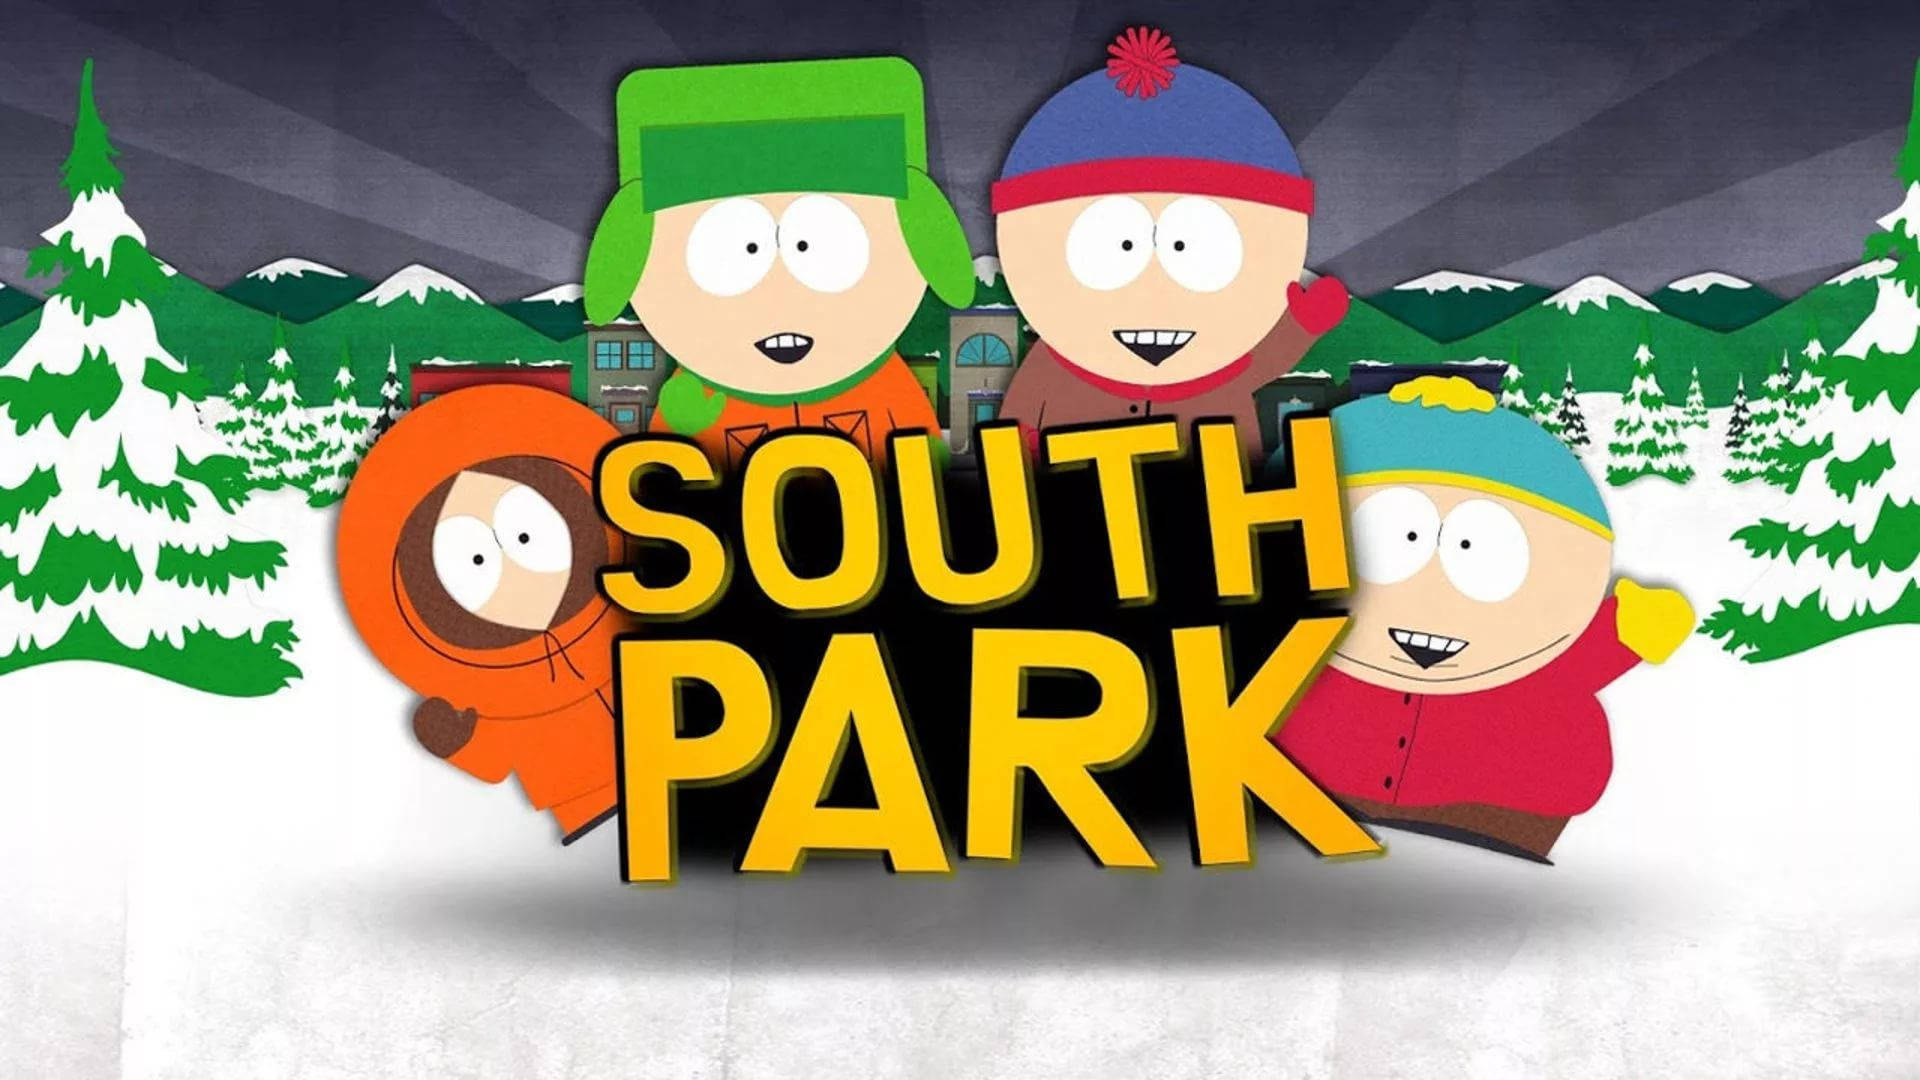 South Park Main Characters On Snow Background